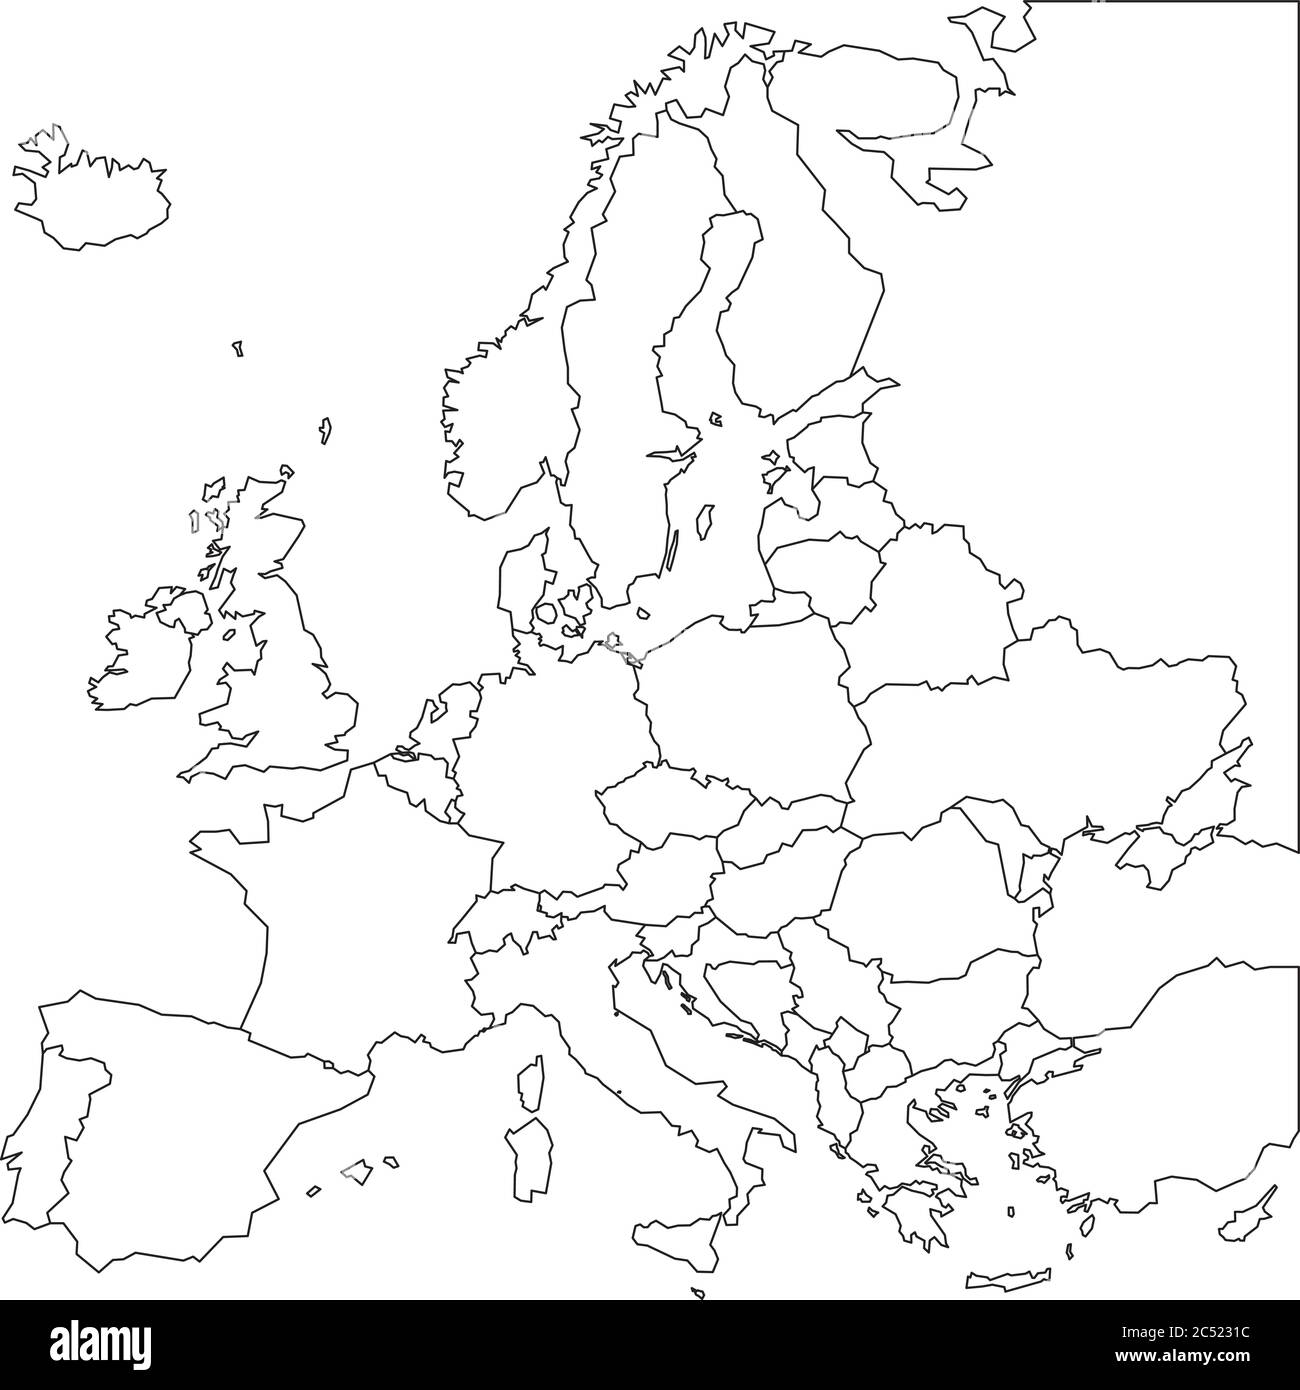 Blank outline map of Europe. Simplified wireframe map of black lined ...